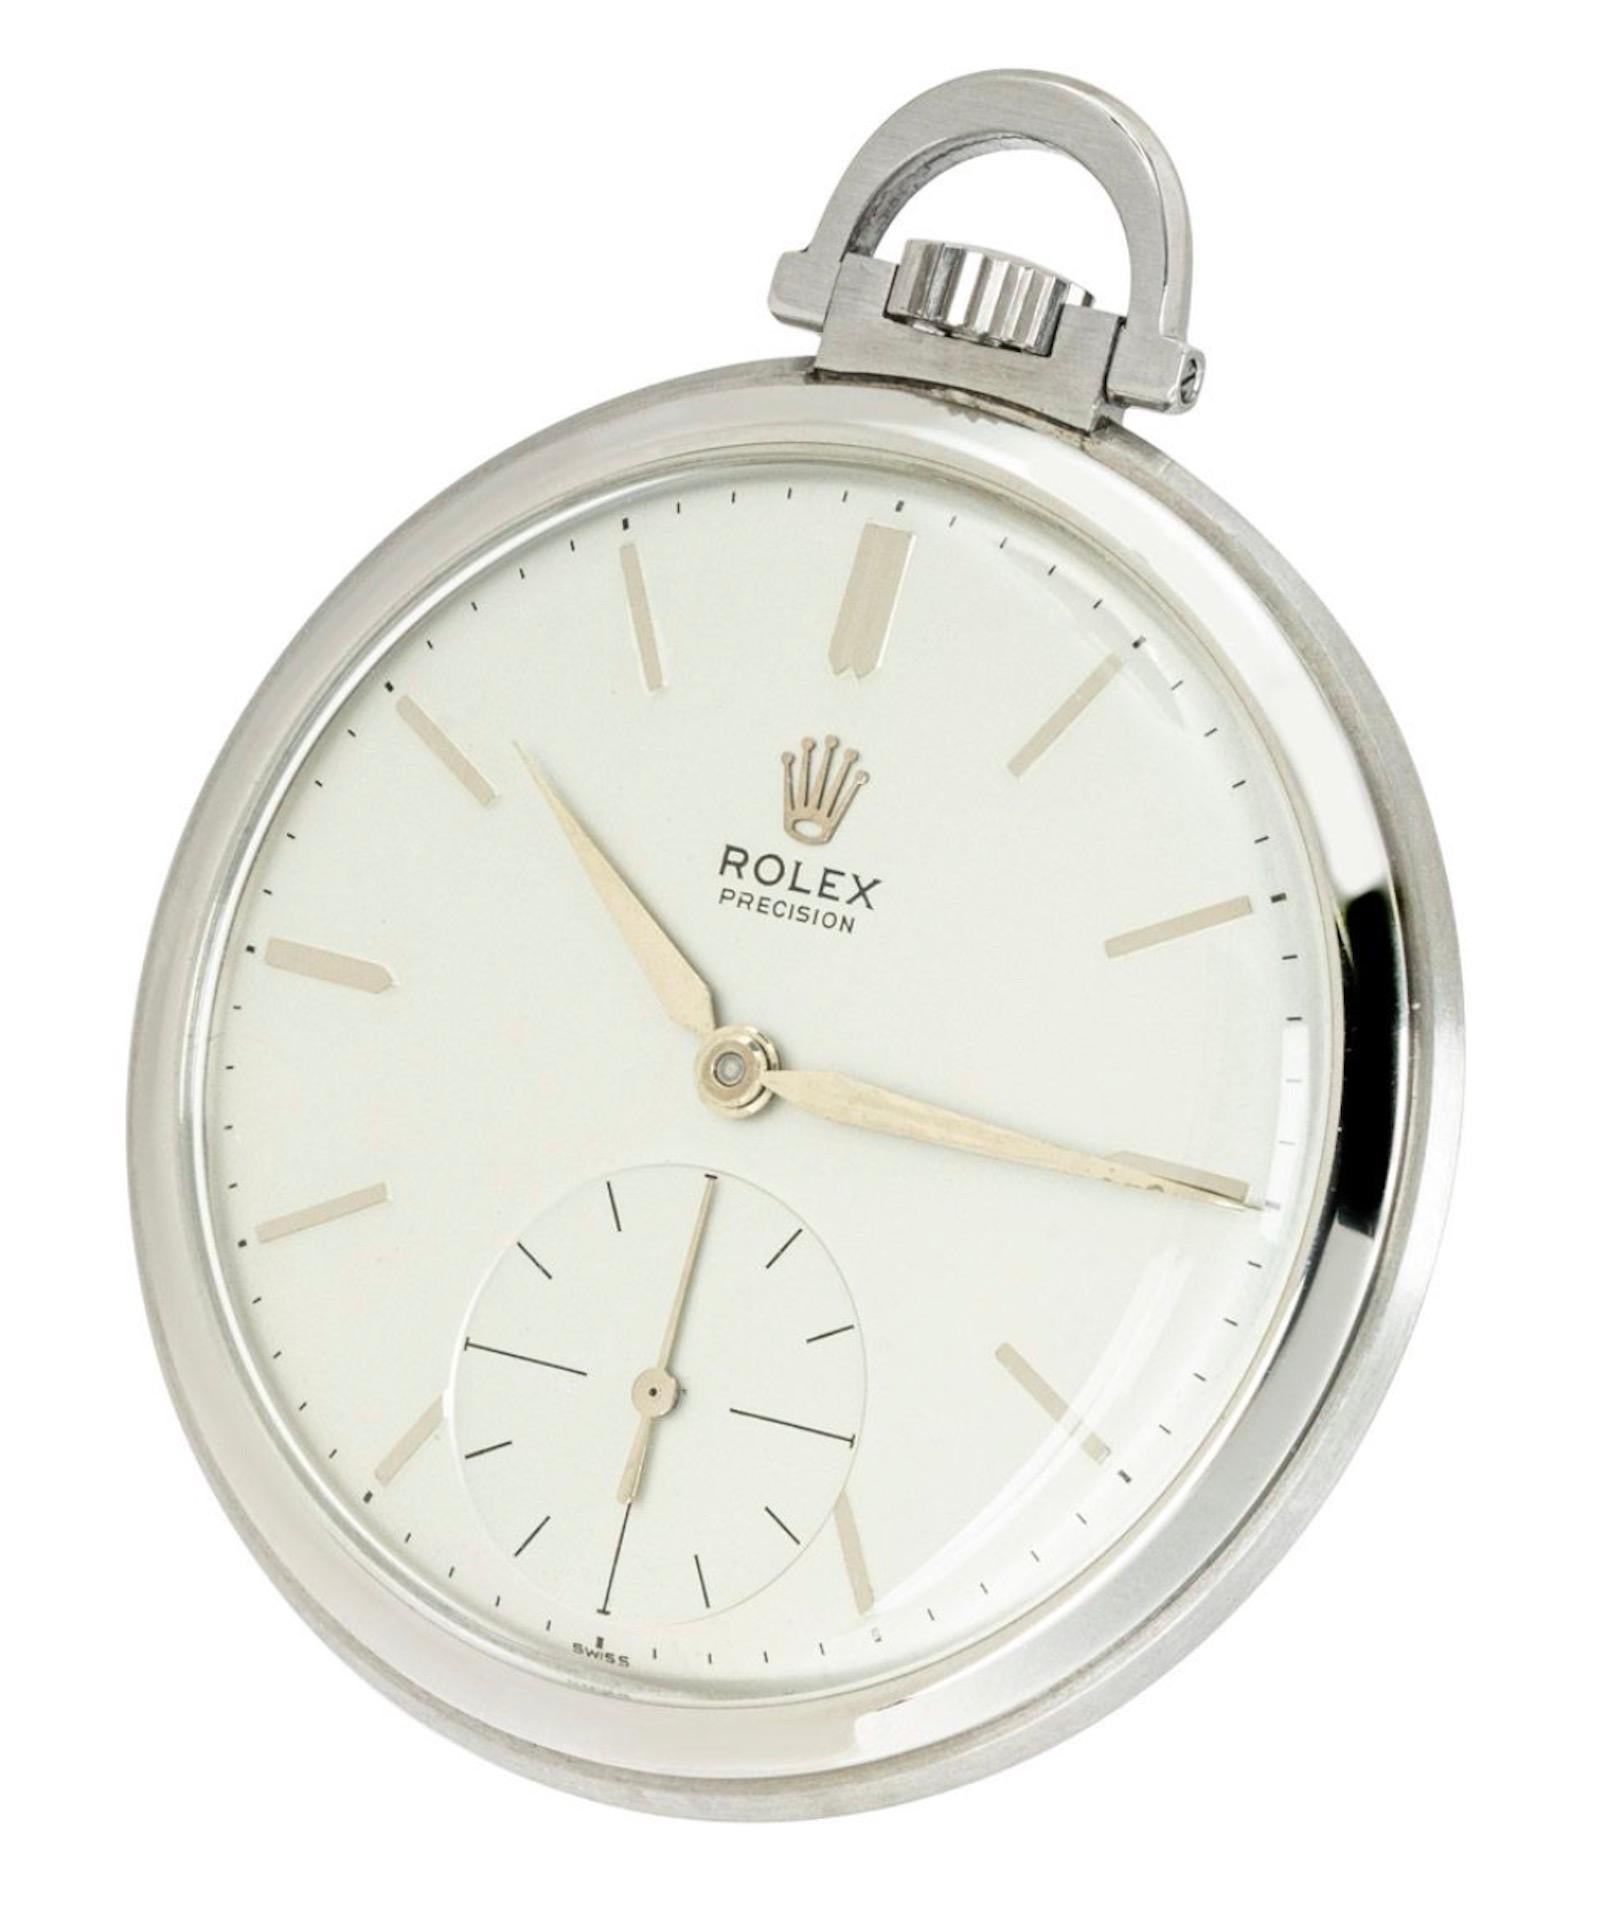 Rolex Precision. A Rare and Important Keyless Lever Stainless Steel Open Face Pocket Watch C1965

Dial: A very crisp and untouched silver baton dial with Rolex Crown at twelve o'clock signed Rolex Precision under the crown with subsidiary seconds